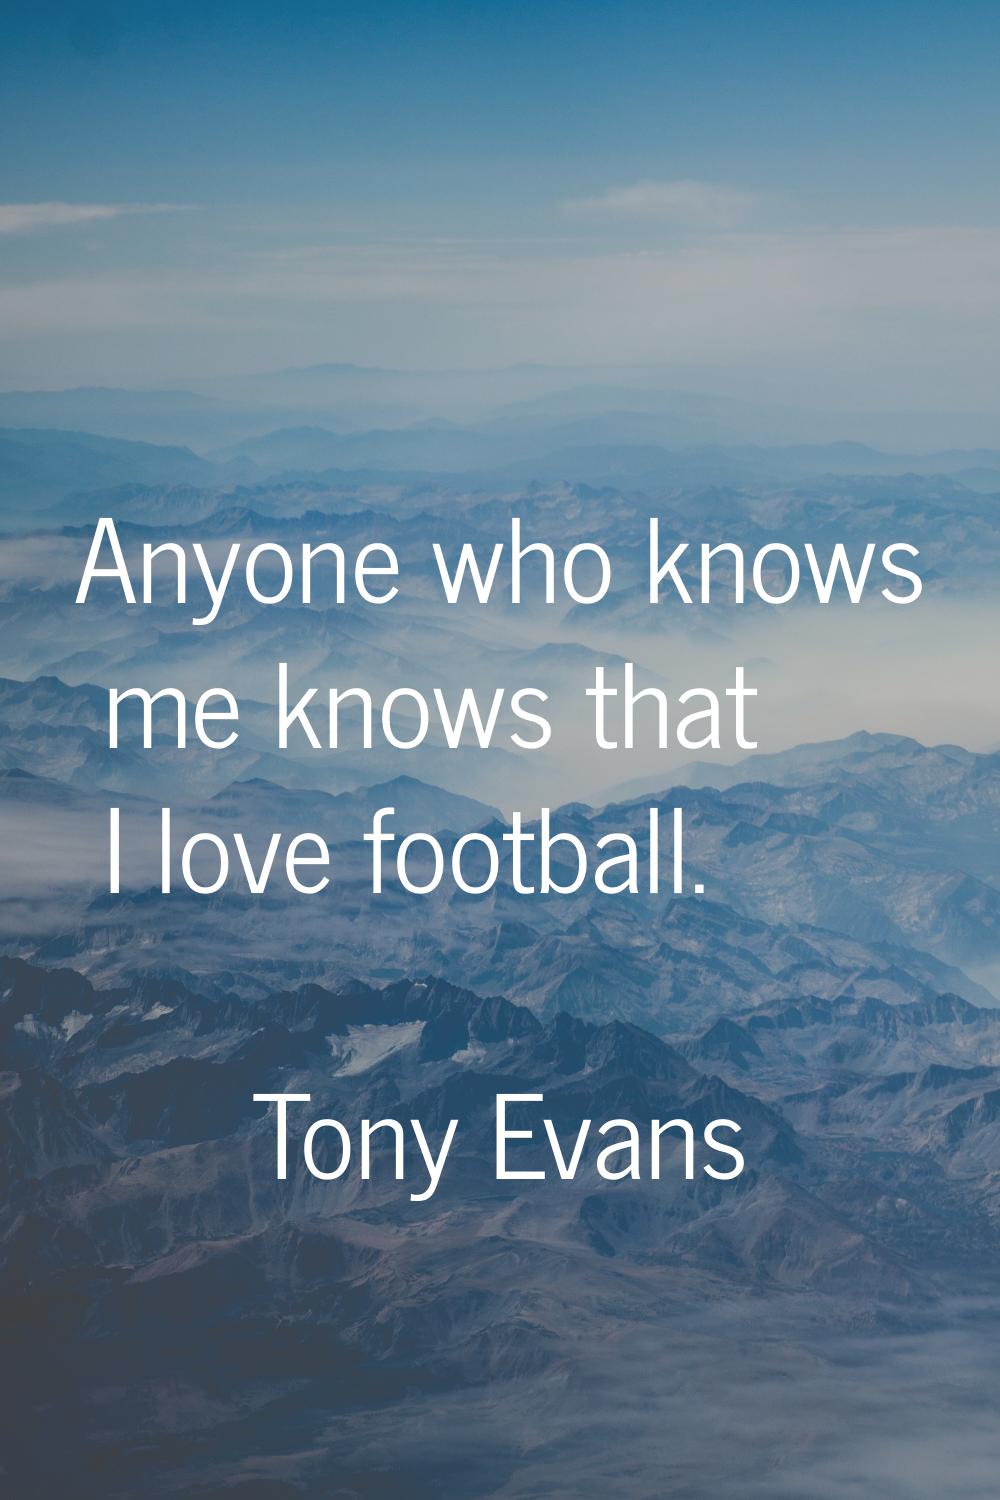 Anyone who knows me knows that I love football.